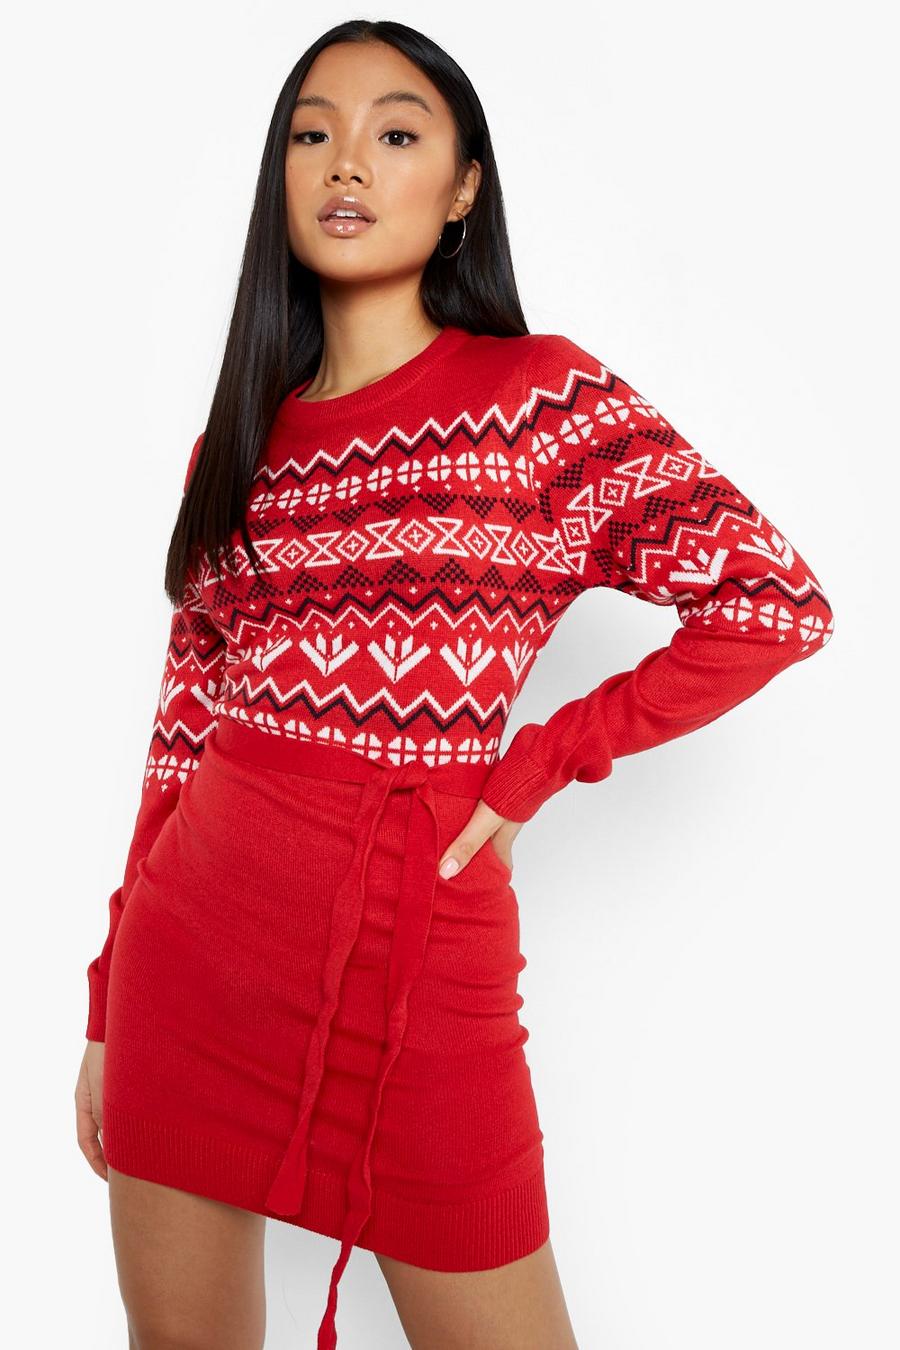 Red Petite Belted Knitted Christmas Sweater Dress